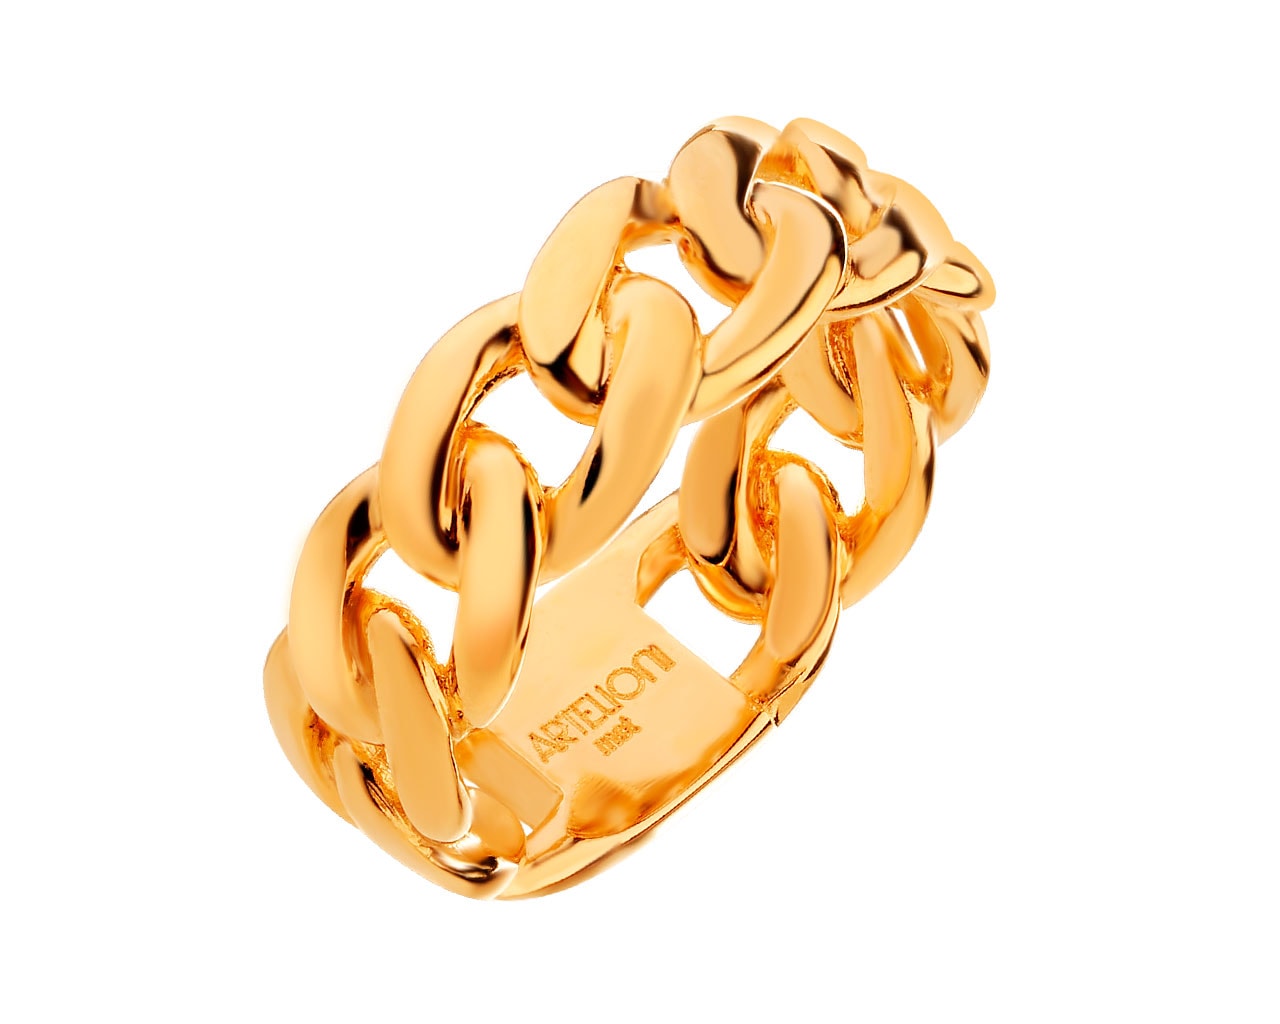 Gold-Plated Bronze Ring